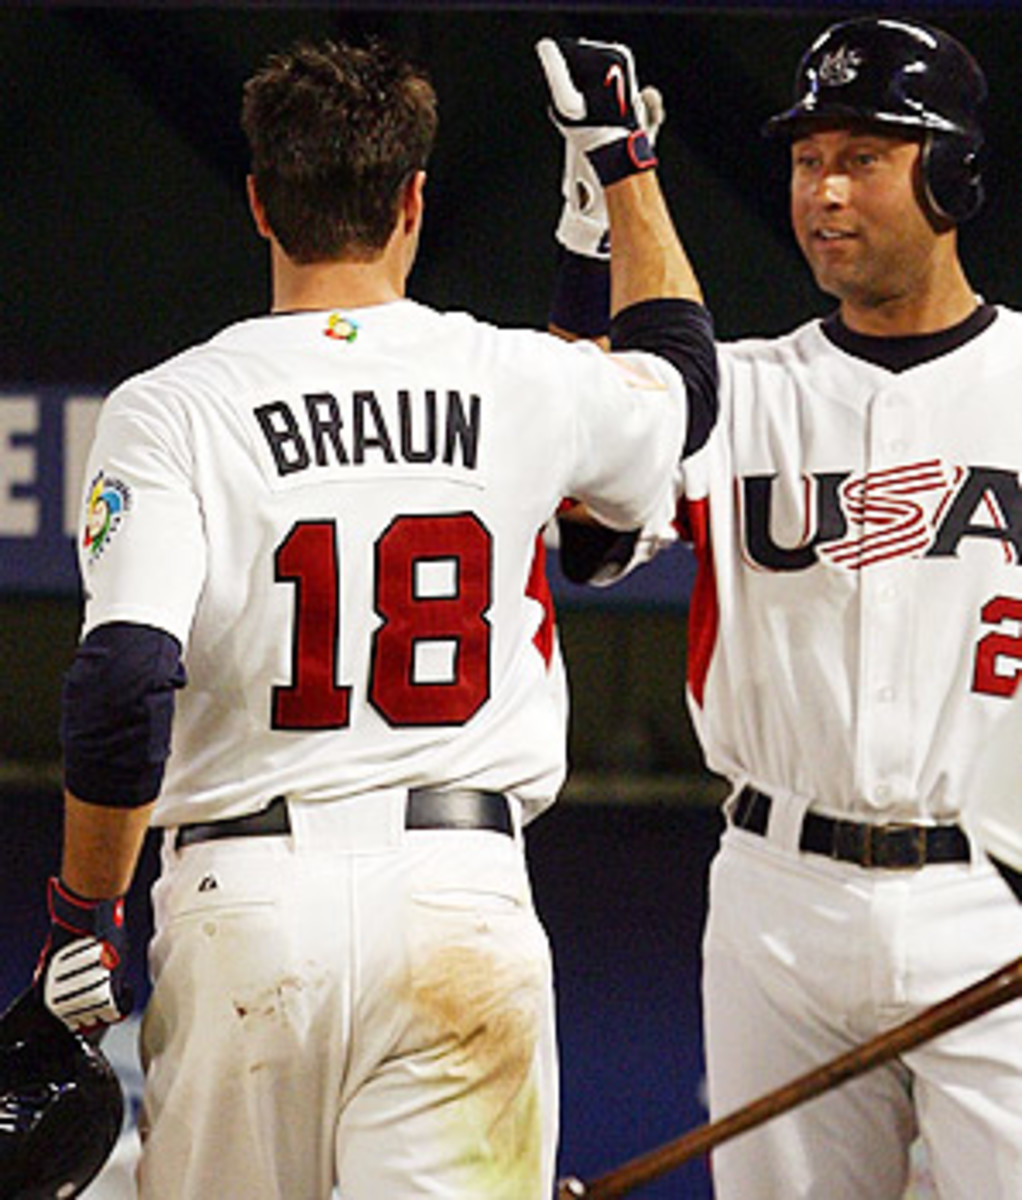 Tom Verducci: Injuries creating problems for Team USA - Sports Illustrated